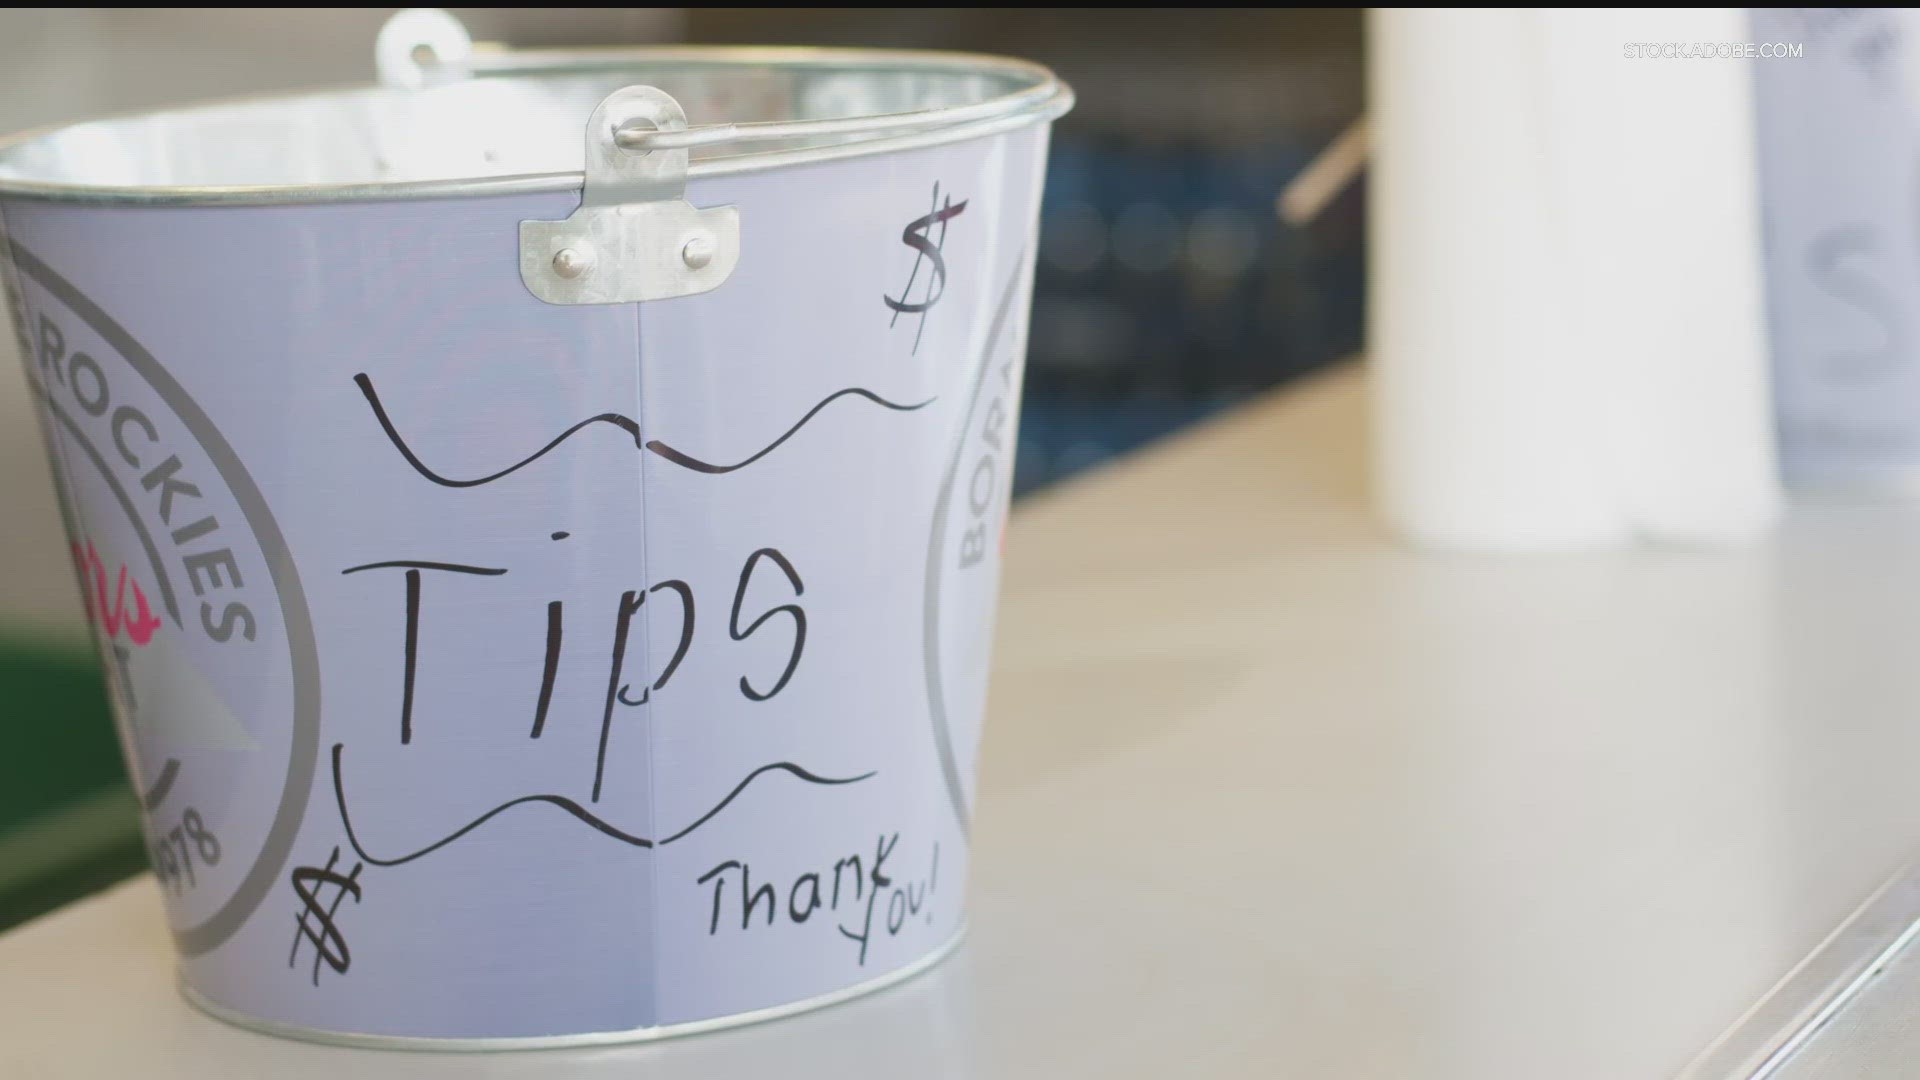 A Forbes Advisor report released in Feb. 2023 found that Americans' tips are more than 11% higher when paying digitally than when they tip in cash.